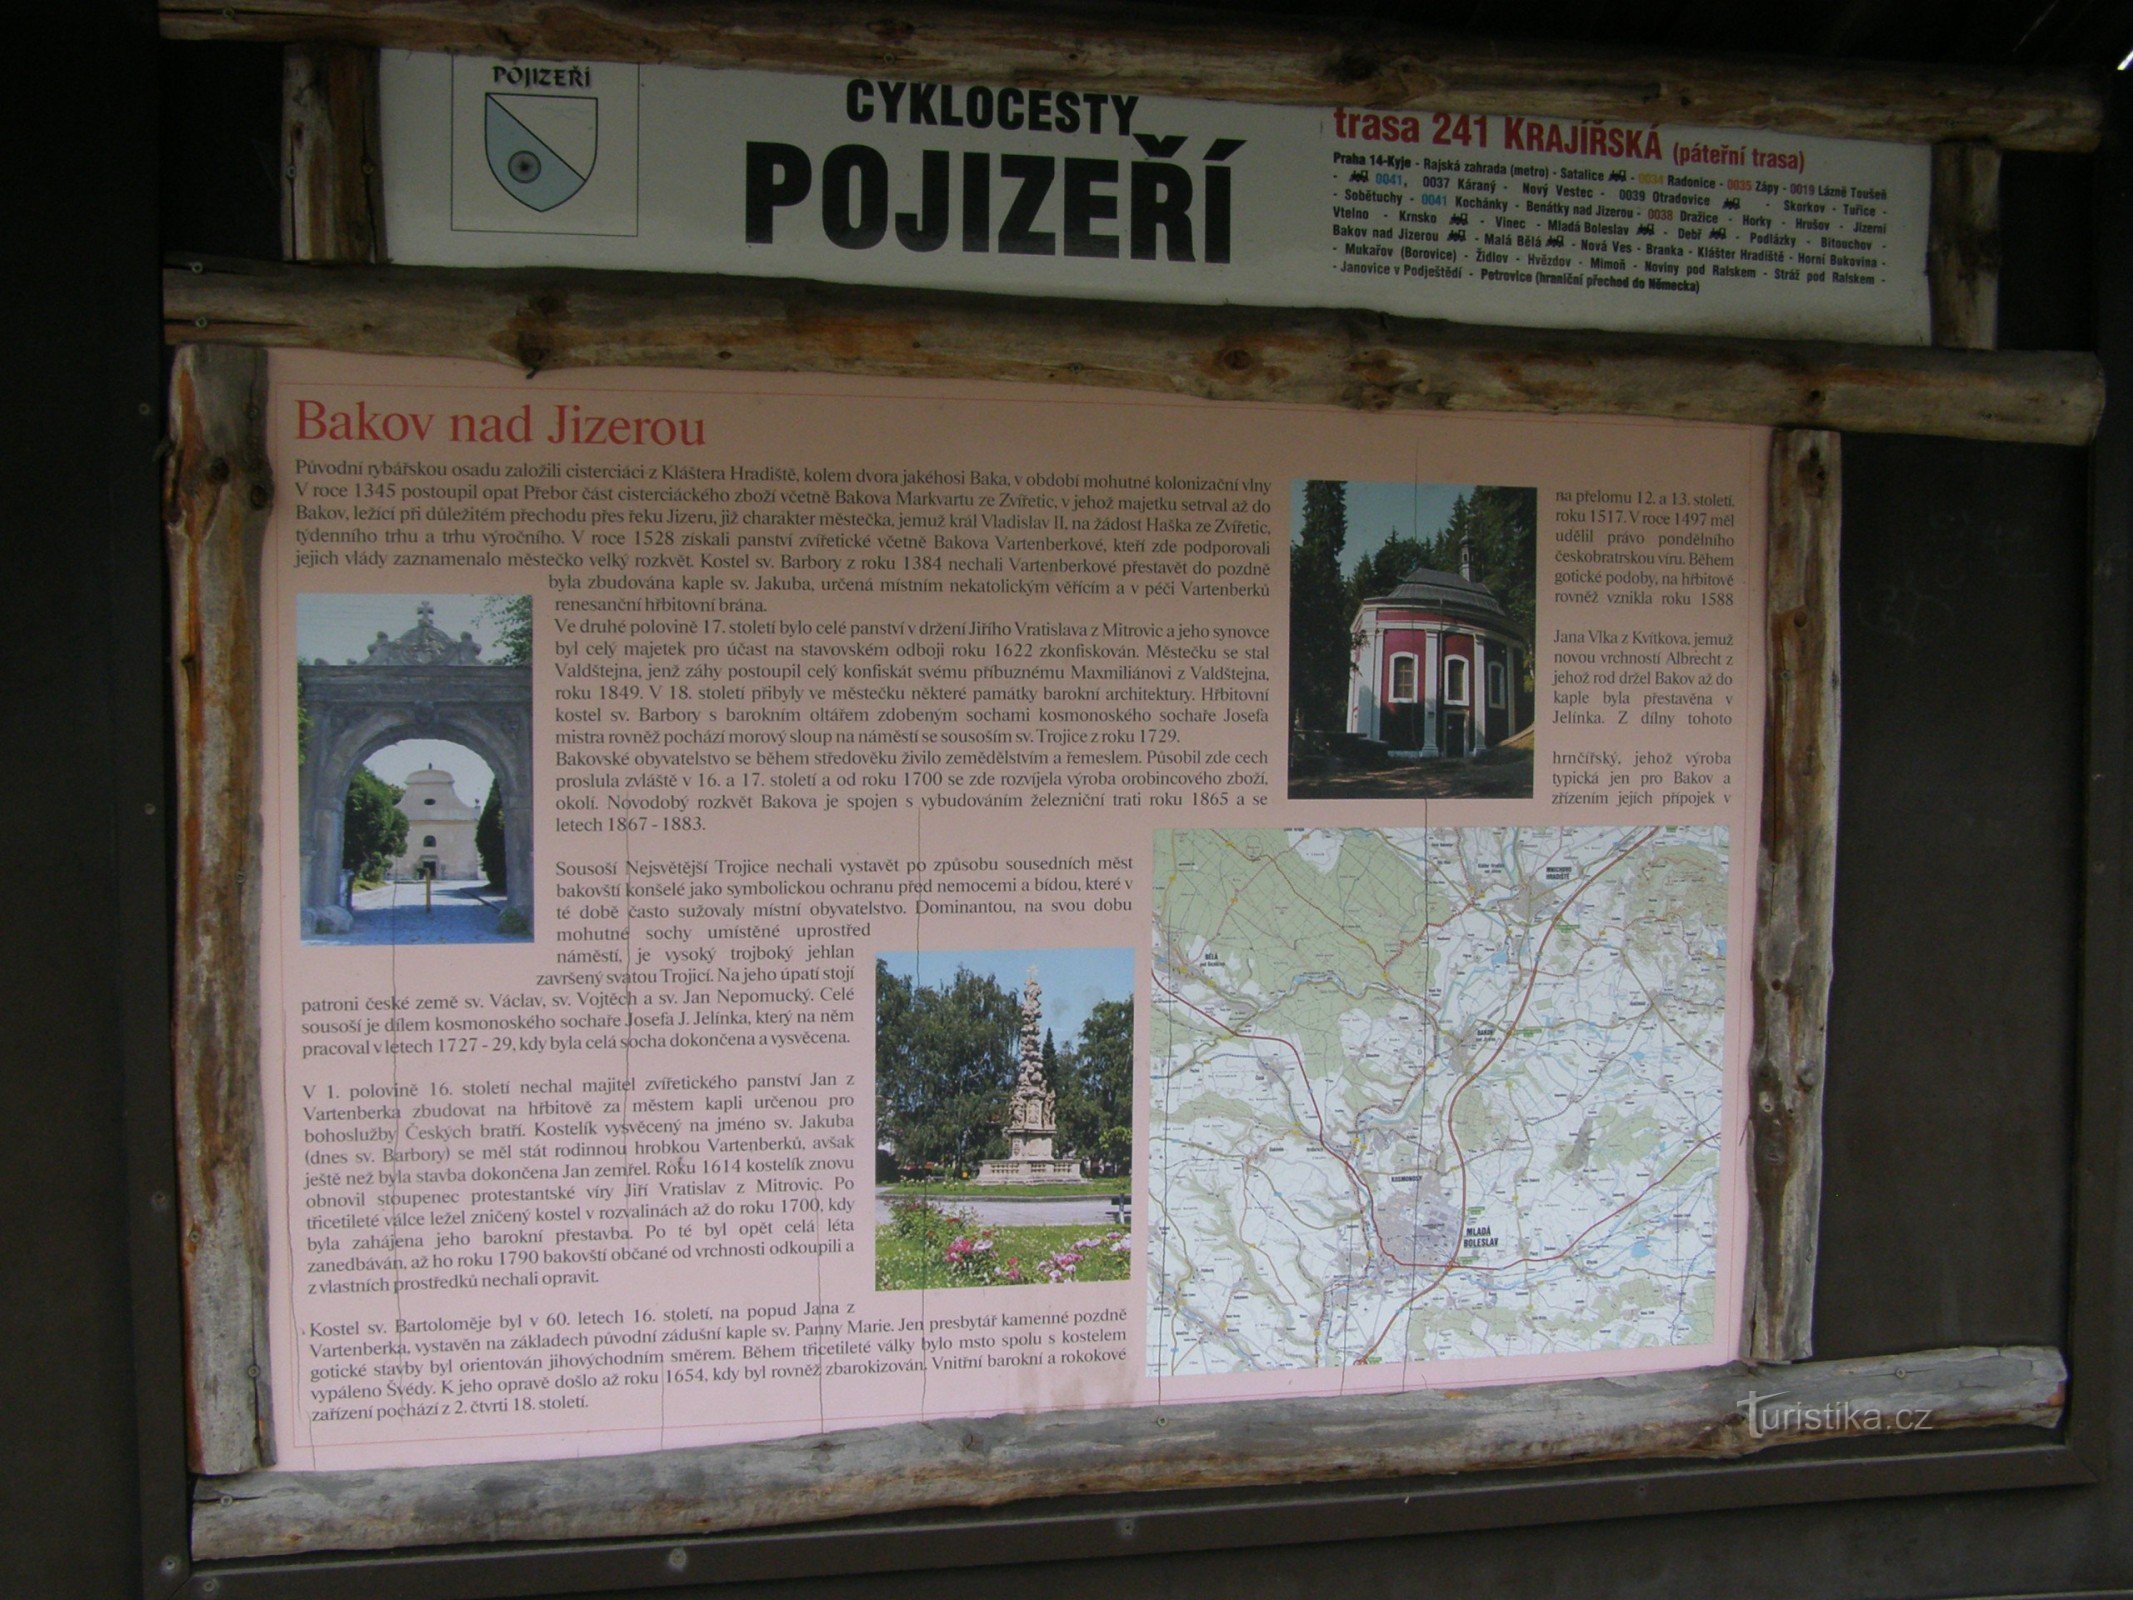 information boards along the route